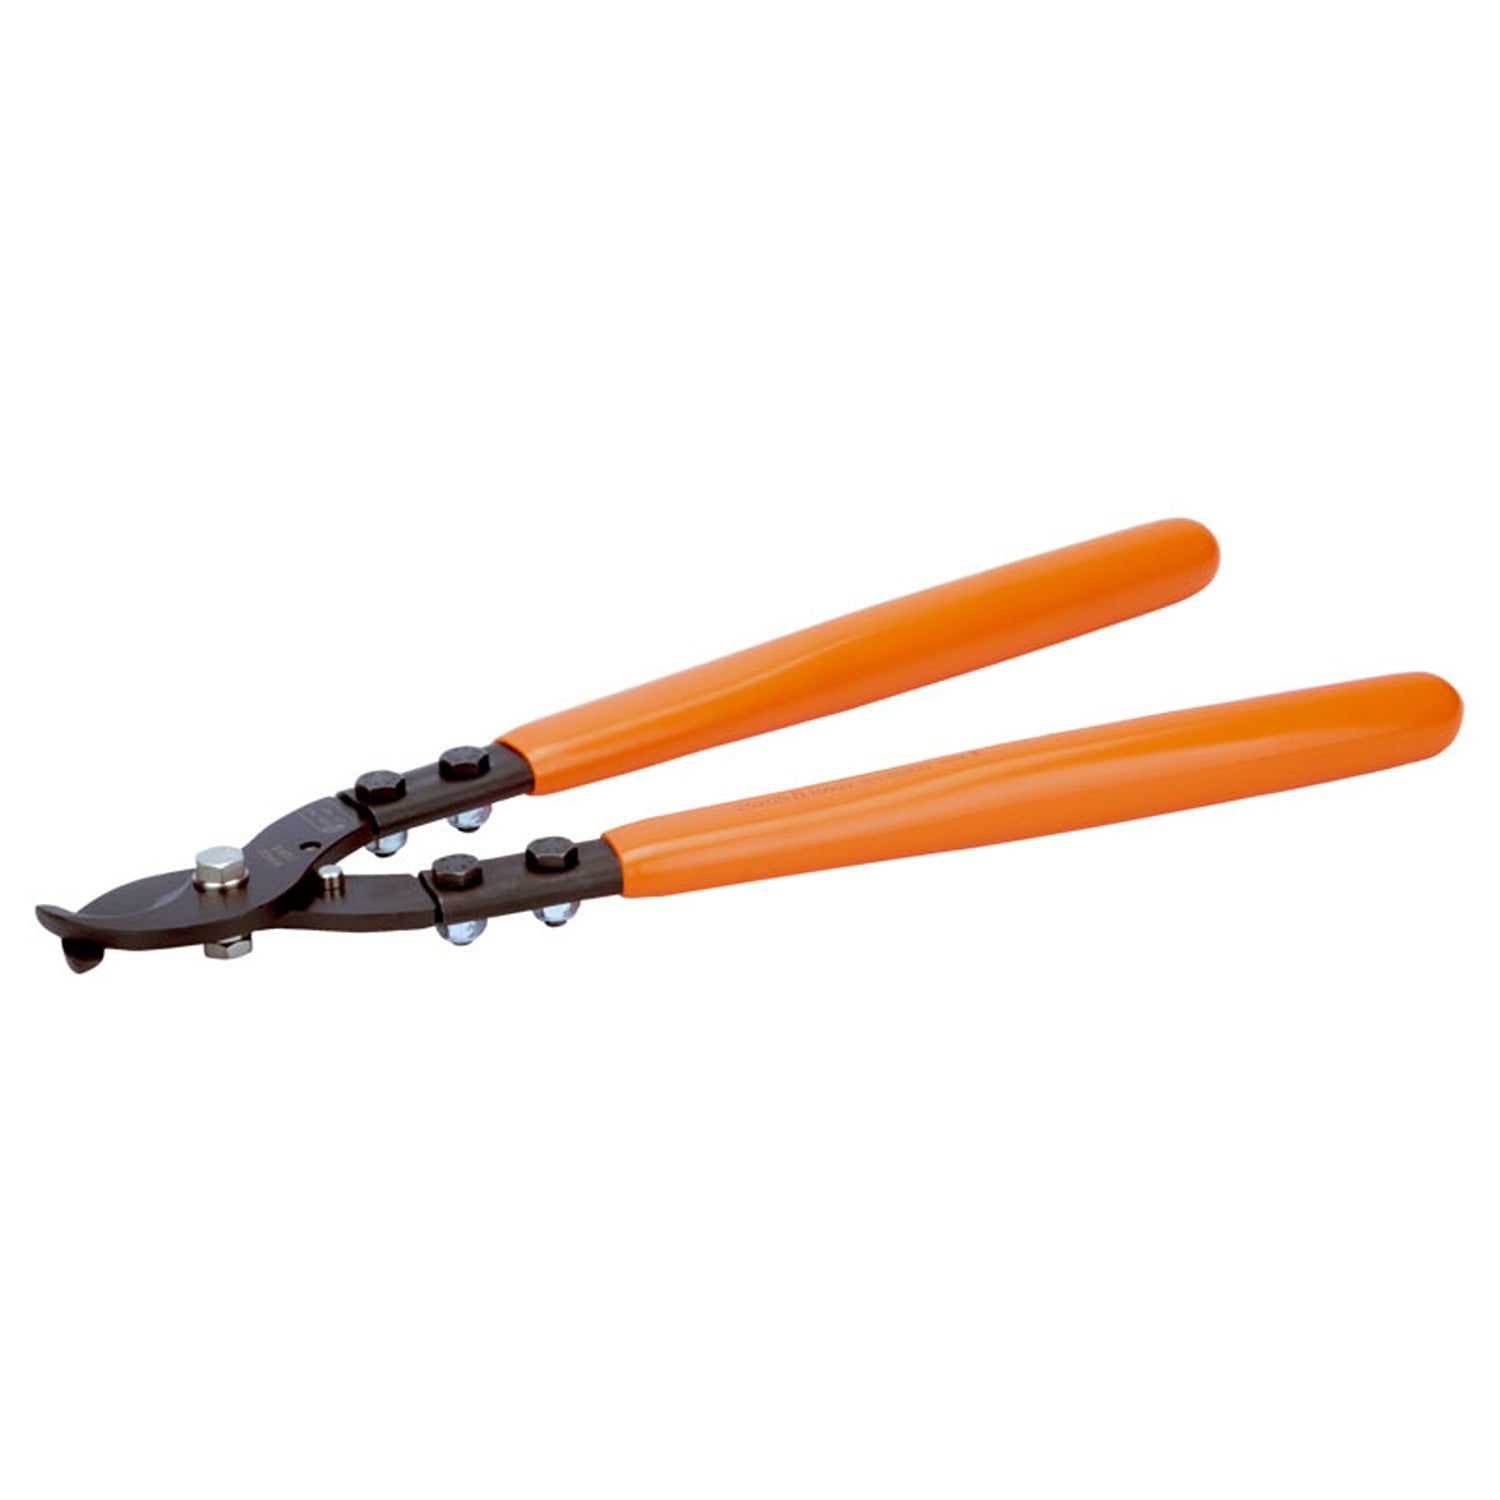 BAHCO 2520S Insulated Cable Cutter for 30 mm Copper/Aluminium - Premium Cable Cutter from BAHCO - Shop now at Yew Aik.